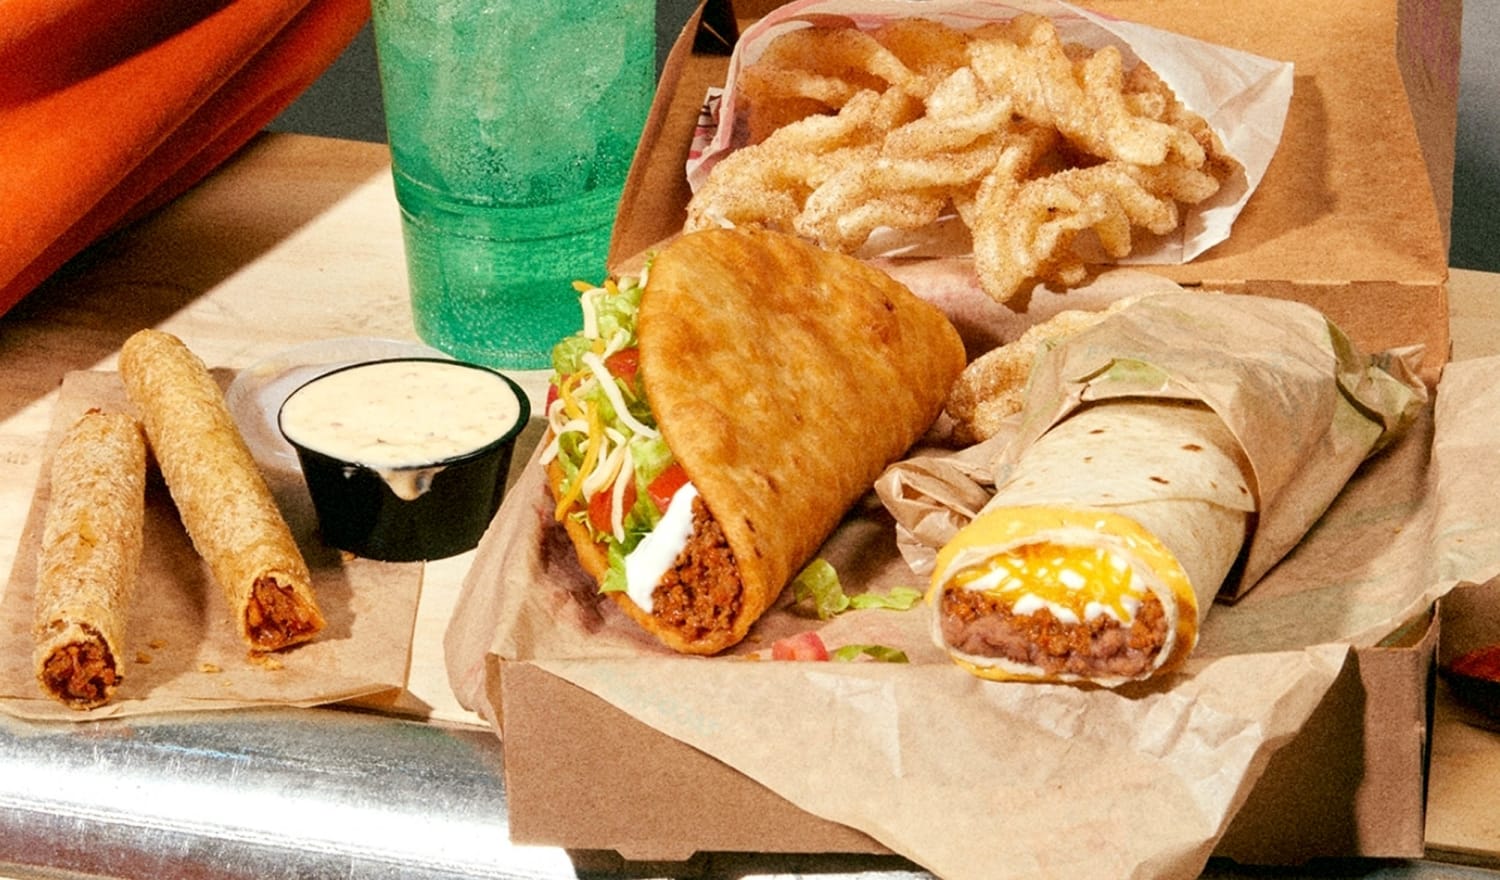 Taco Bell Has a New $2 Item, and It's Not a Taco